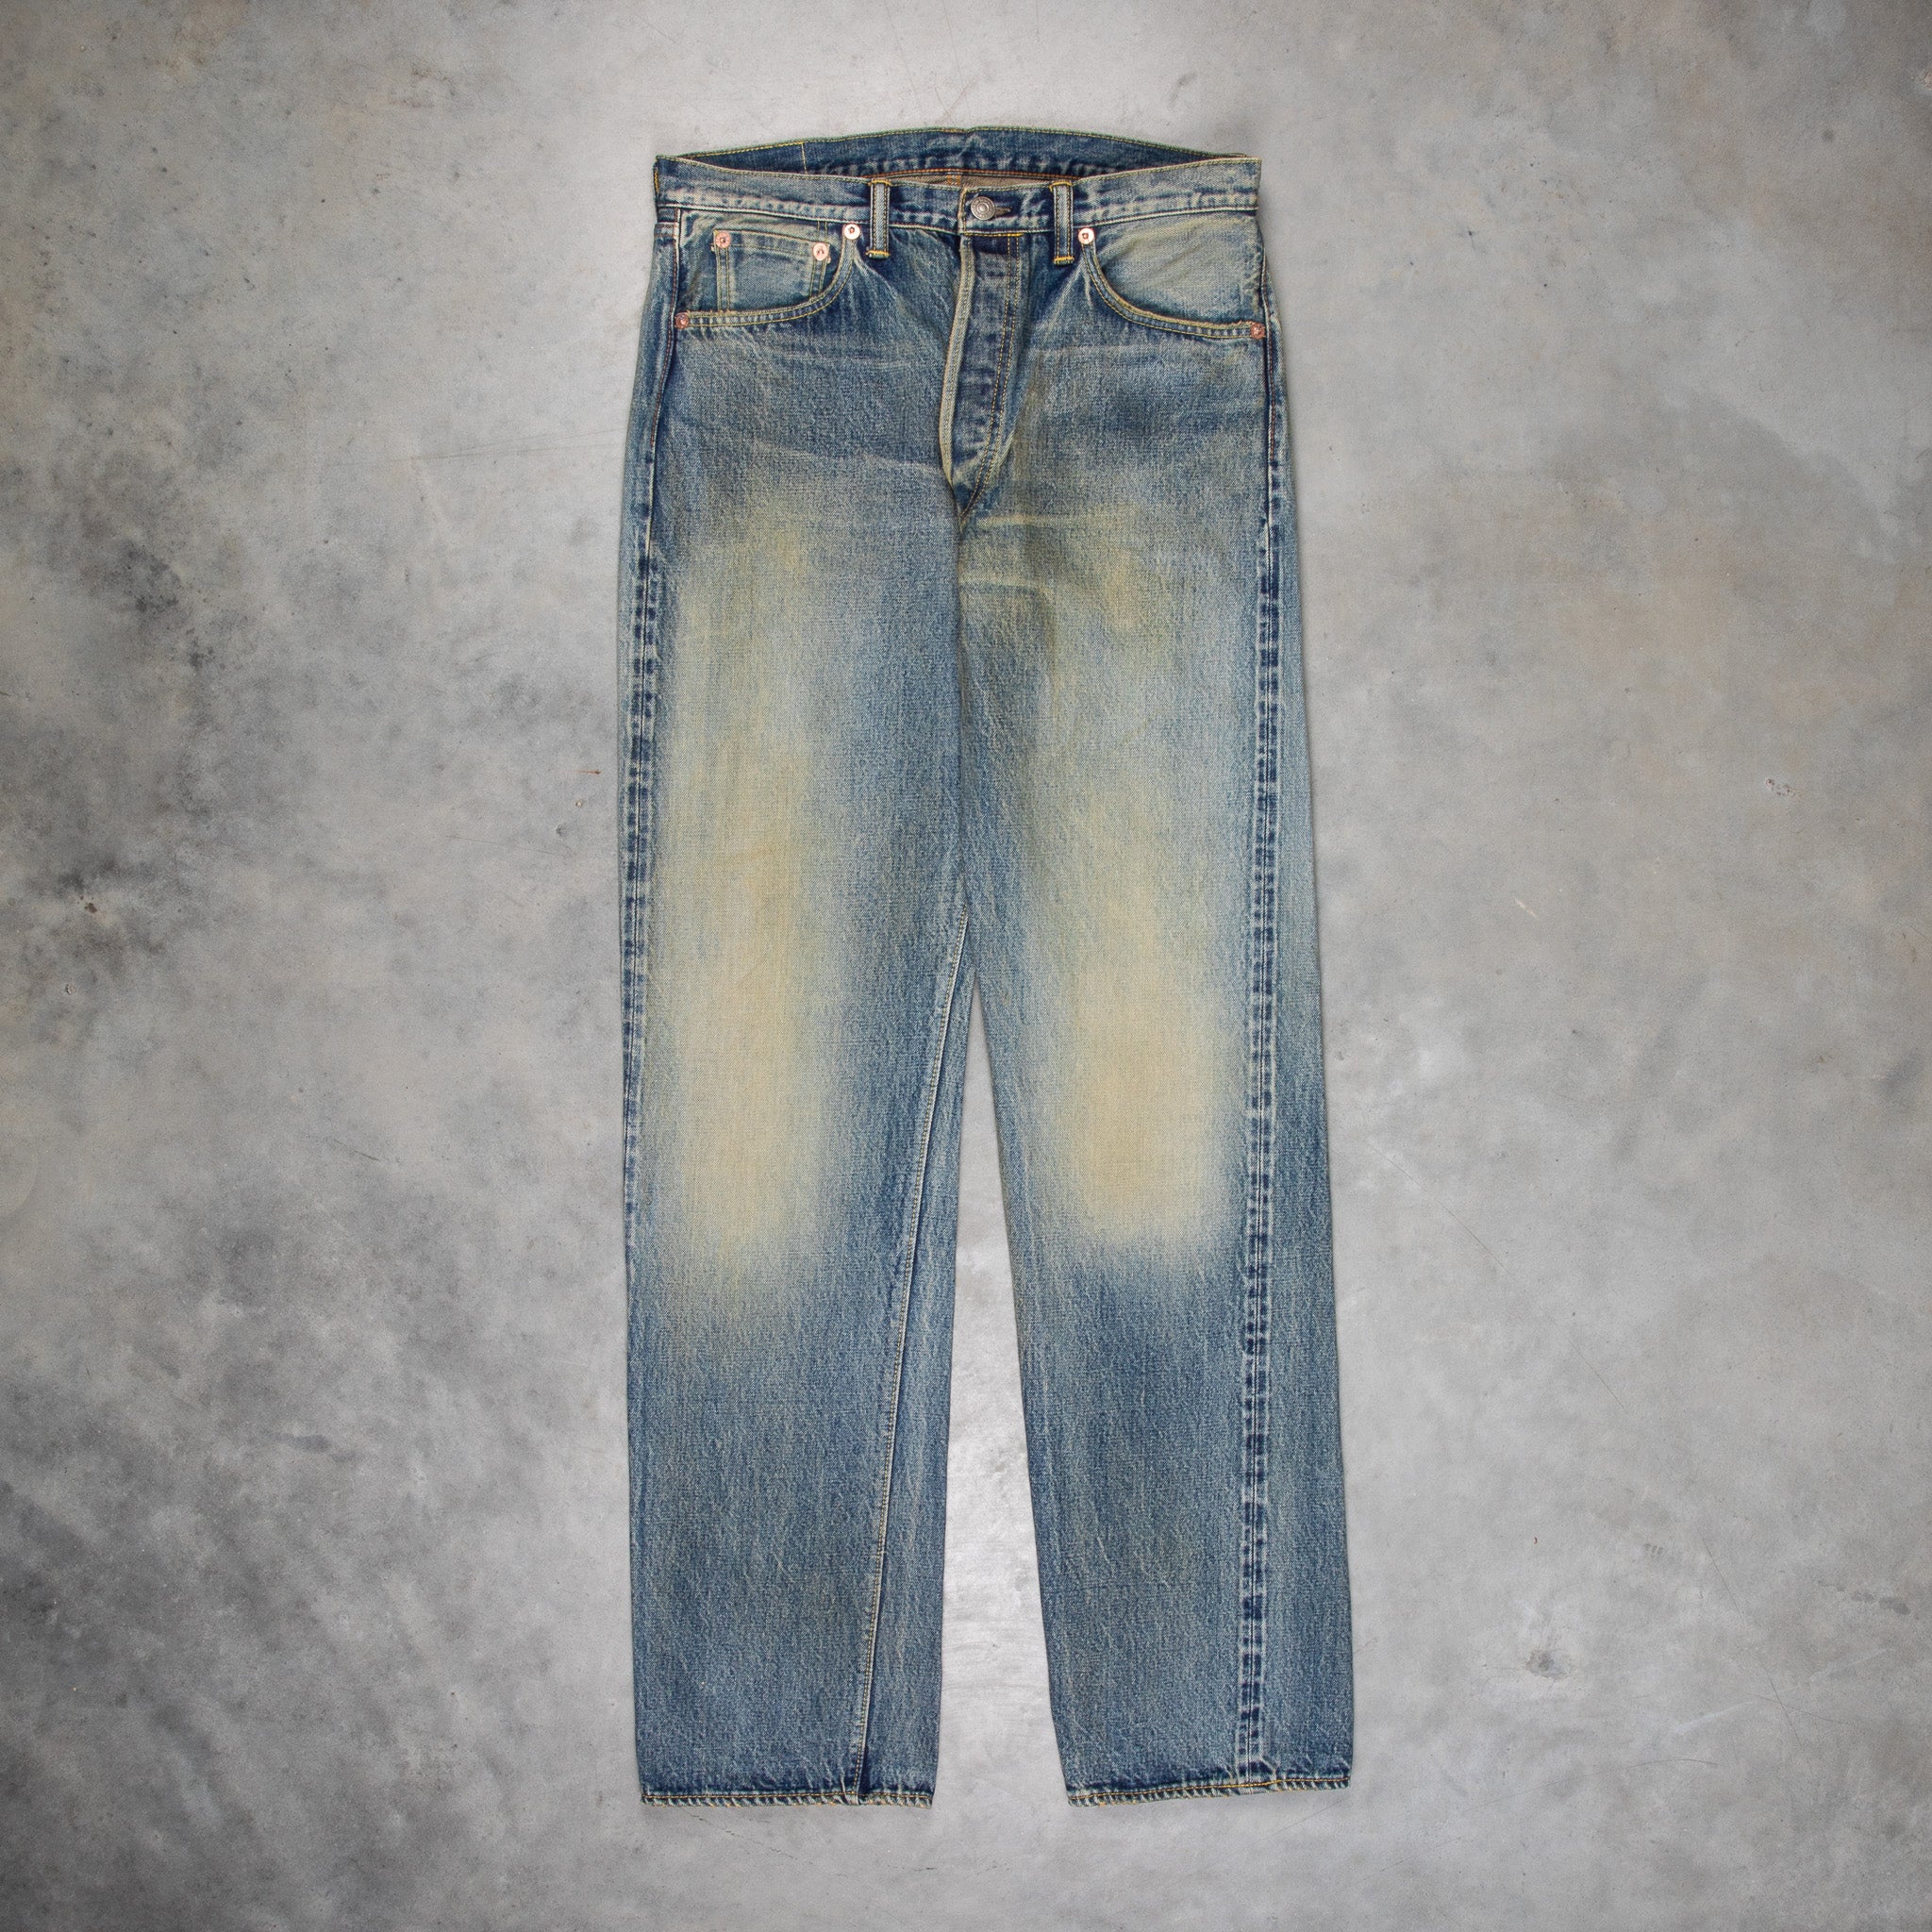 The Real McCoy&#39;s 001XX Washed Jeans